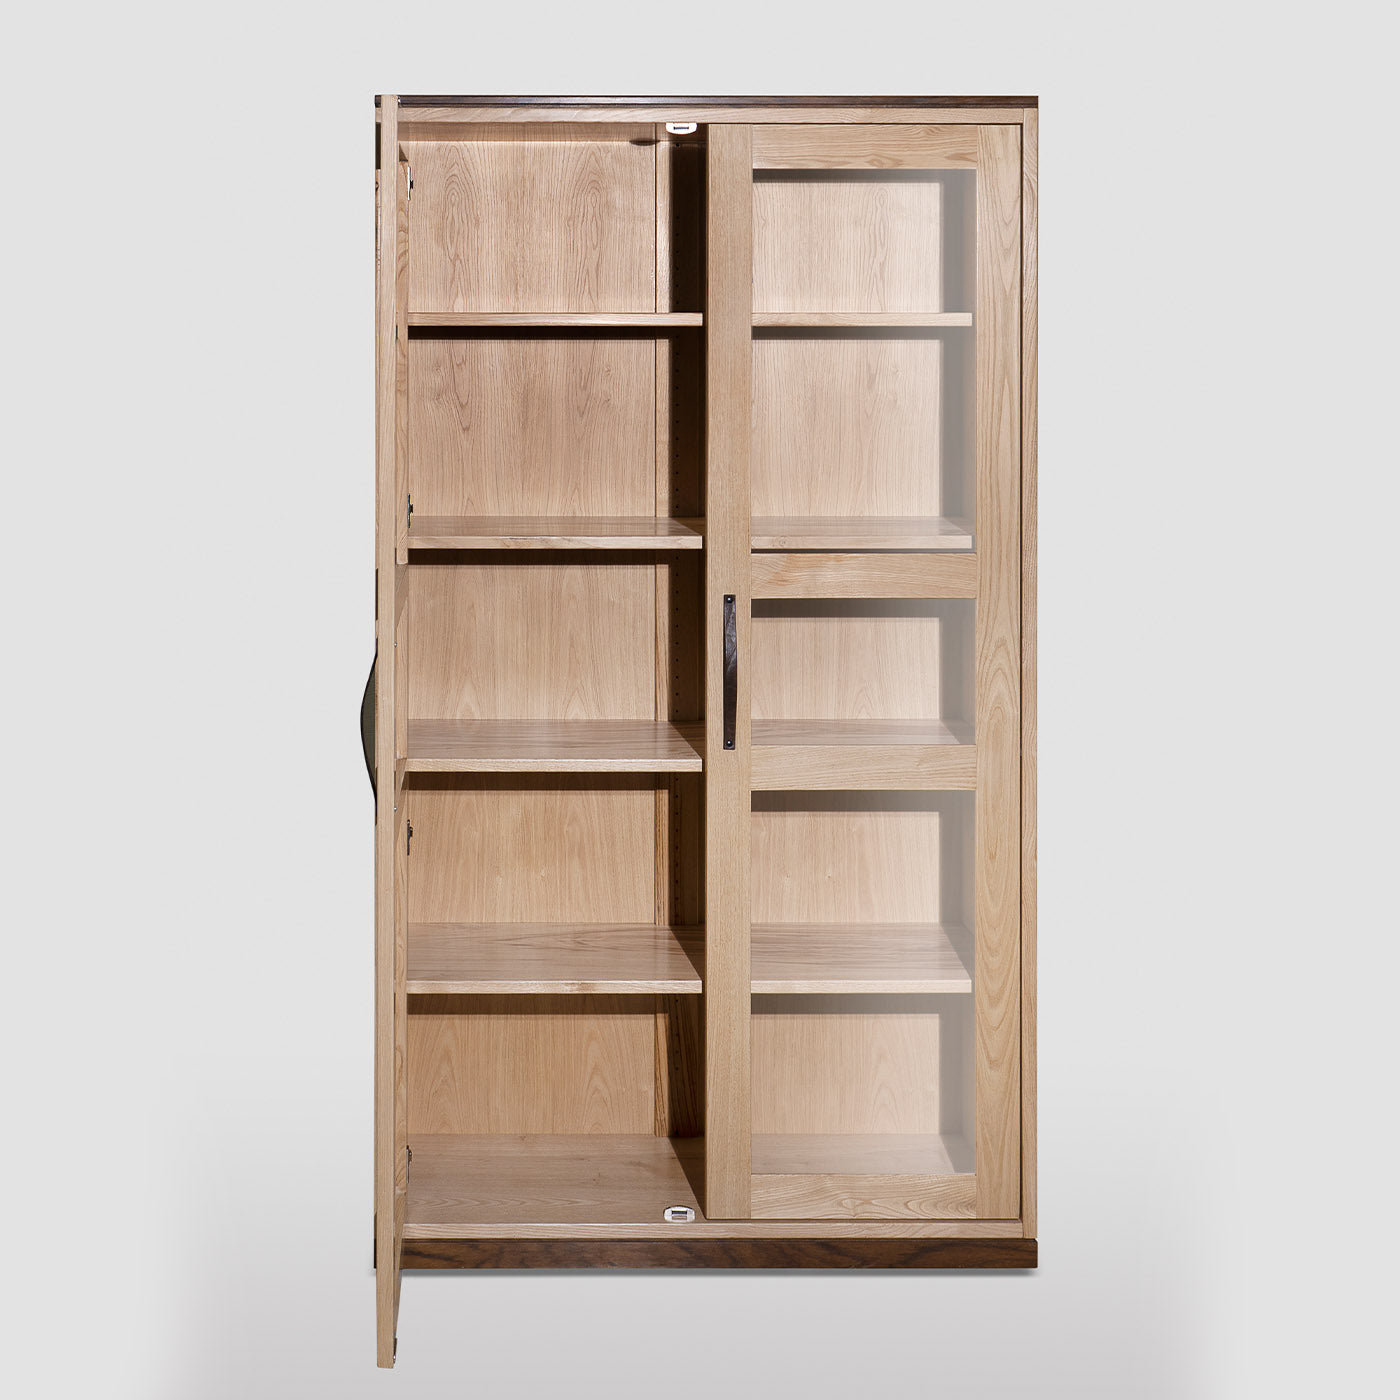 Siv Two-Door Bookcase by Erika Gambella - Alternative view 3